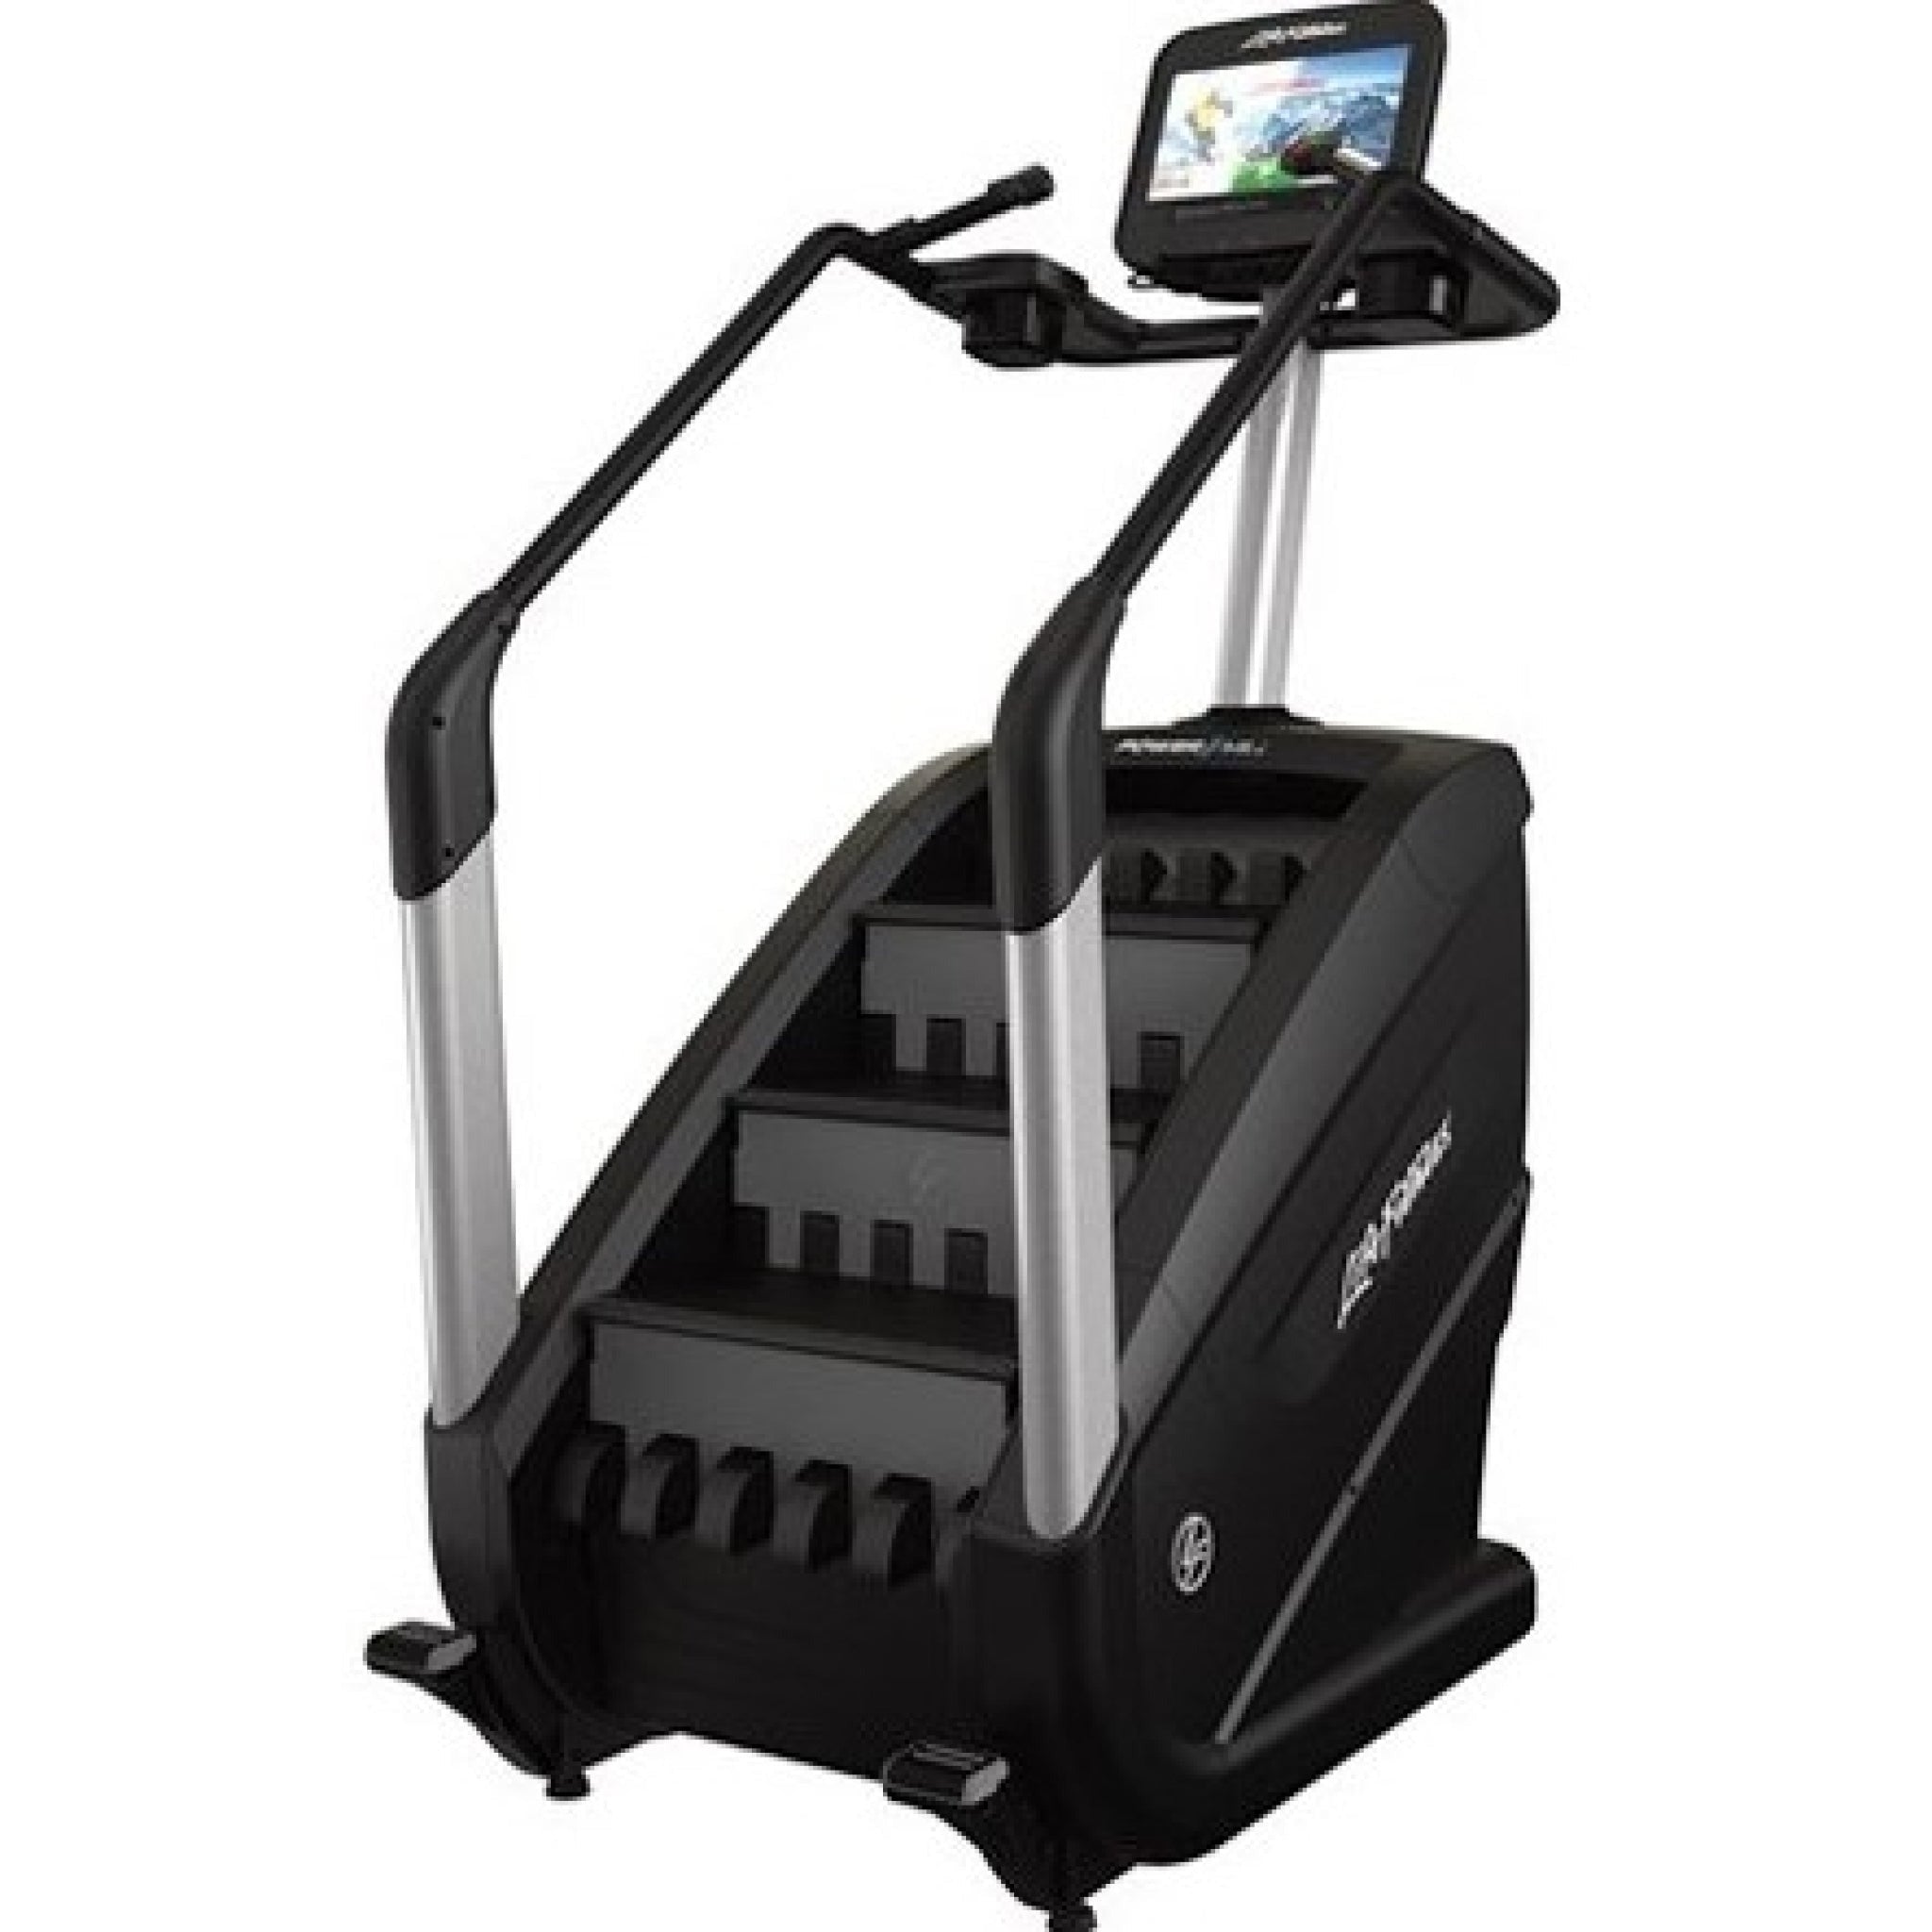 The Life Fitness Discover SE 95PS Elevation PowerMill Climber